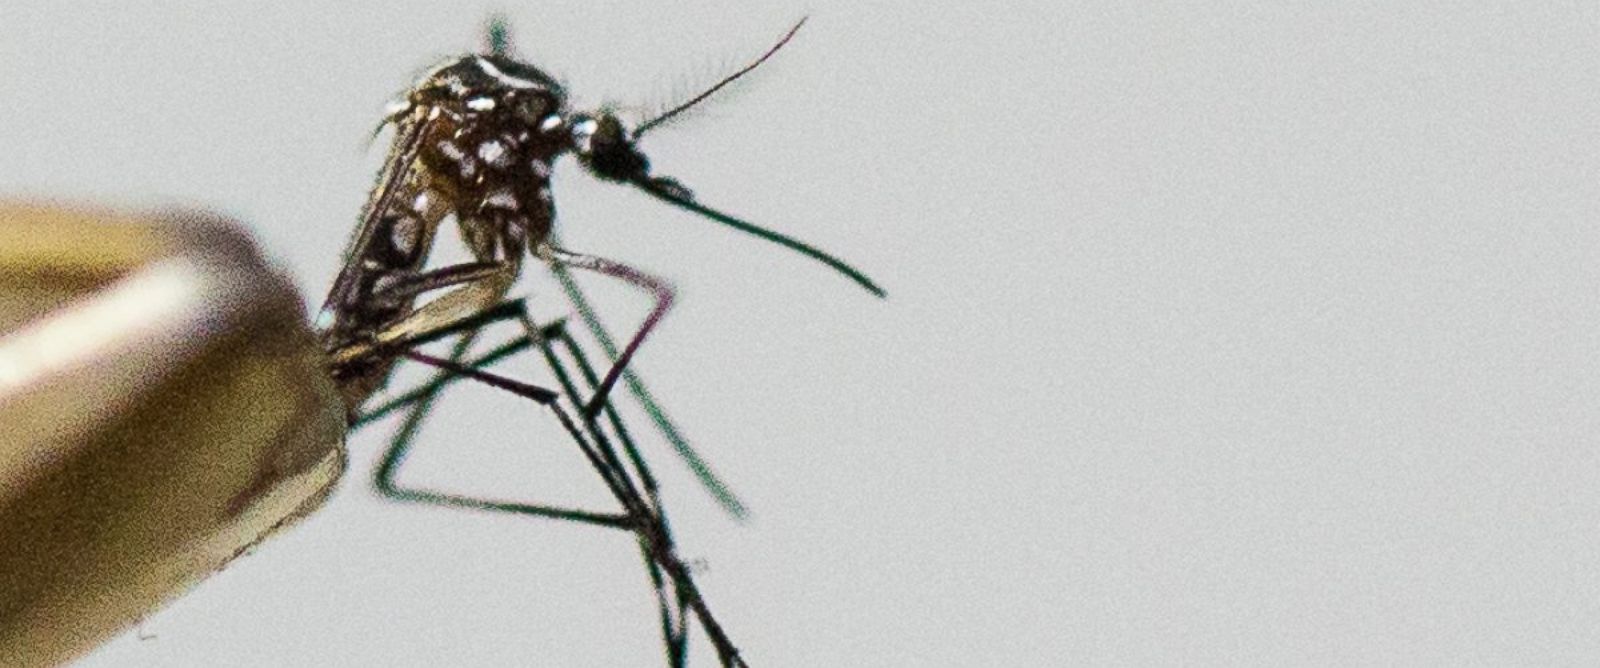 PHOTO: Aedes aegypti mosquito, the species which transmits the dengue virus, chikungunya fever and zika is photographed on March 4, 2016 in Sao Paulo, Brazil.